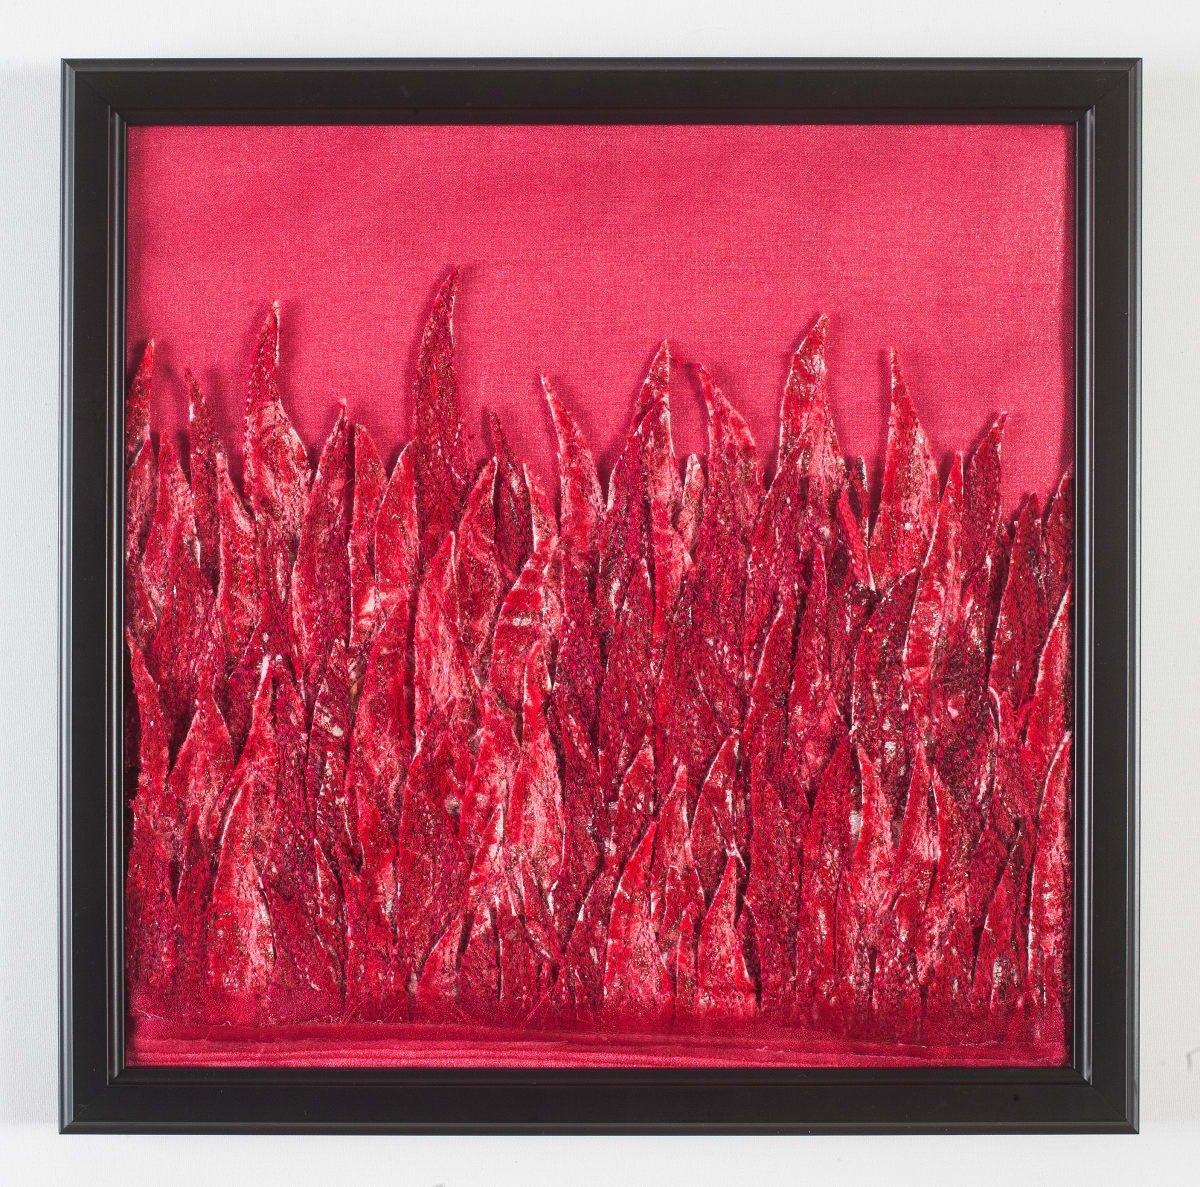 Synesthesia #19 Red by Lesley Turner  Image: Lesley Turner, 'Synesthesia #19 Red', 2017, 13"x13"x0.5". Nylon, acrylic felt and polyester fabric, polyester thread, acrylic paint, oil stick. Working monochromatically I focused on expressing the color’s radiating energy through line and value.  Photo: Tony Bounsall Photo-Design